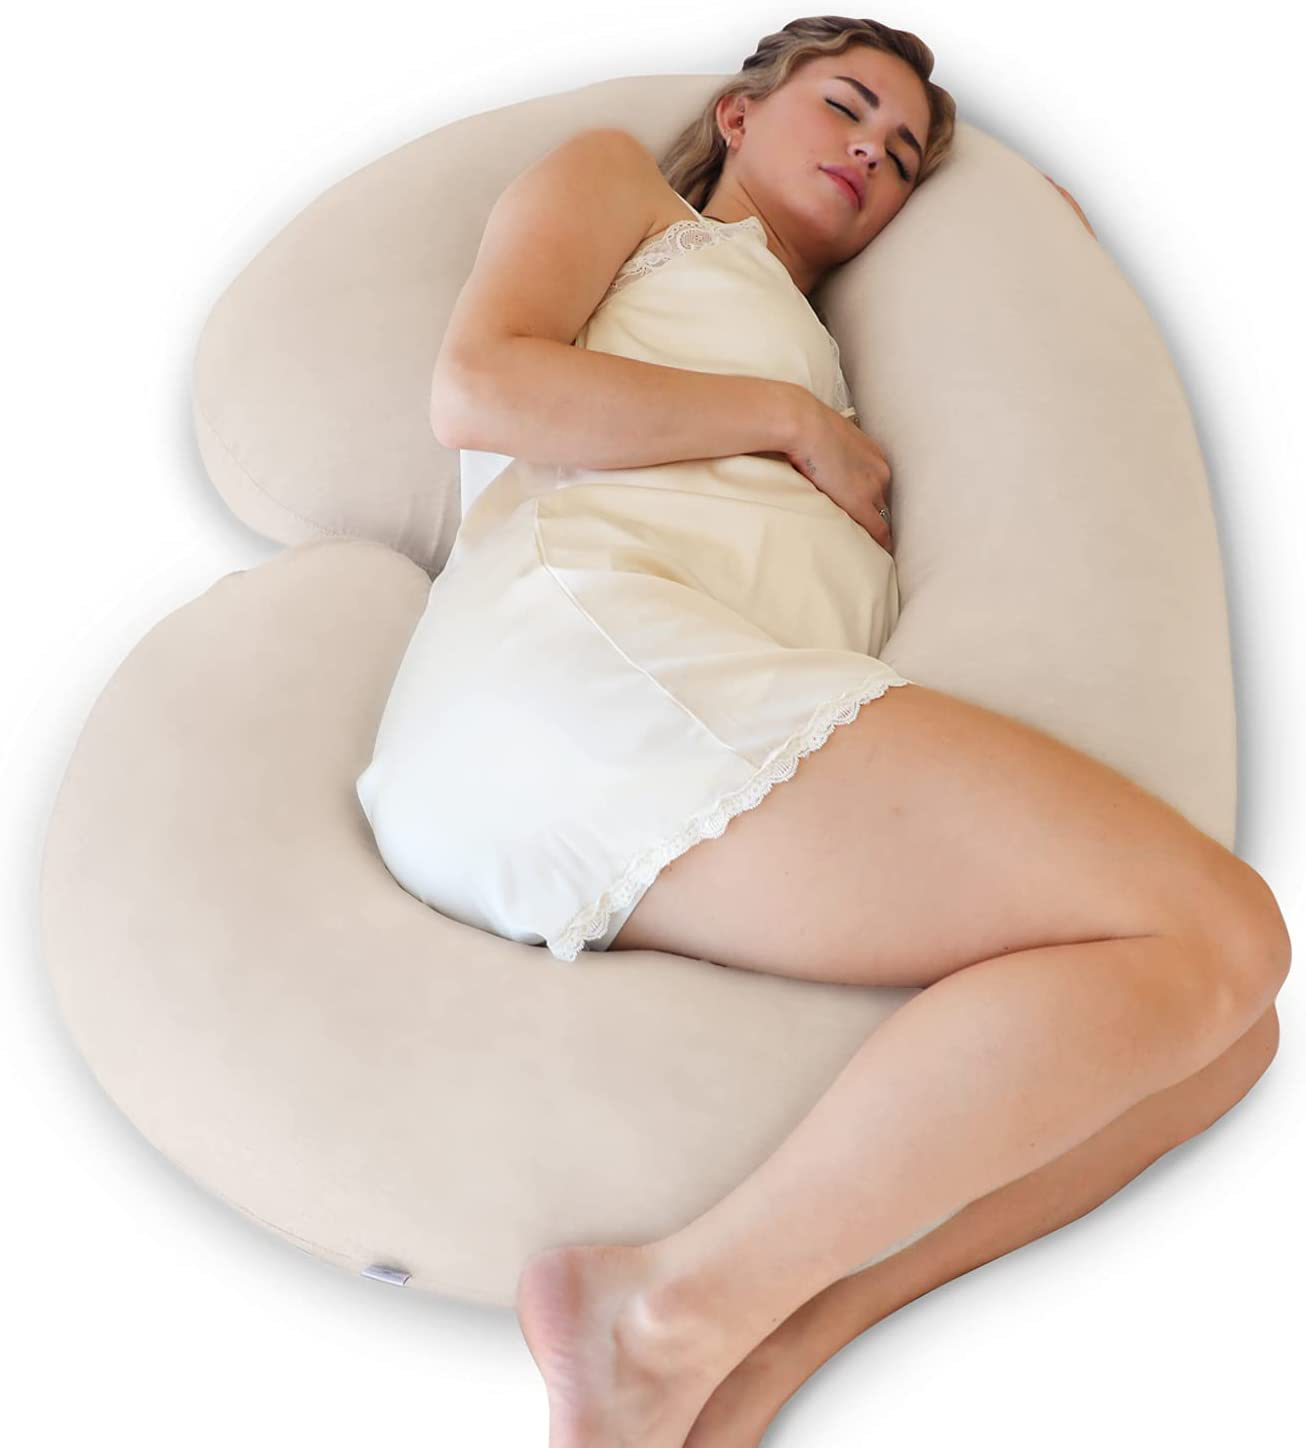 Pregnancy Pillow, C-Shape Full Body Pillow and Maternity Support for Back, Hips, Legs, Belly for Pregnant Women